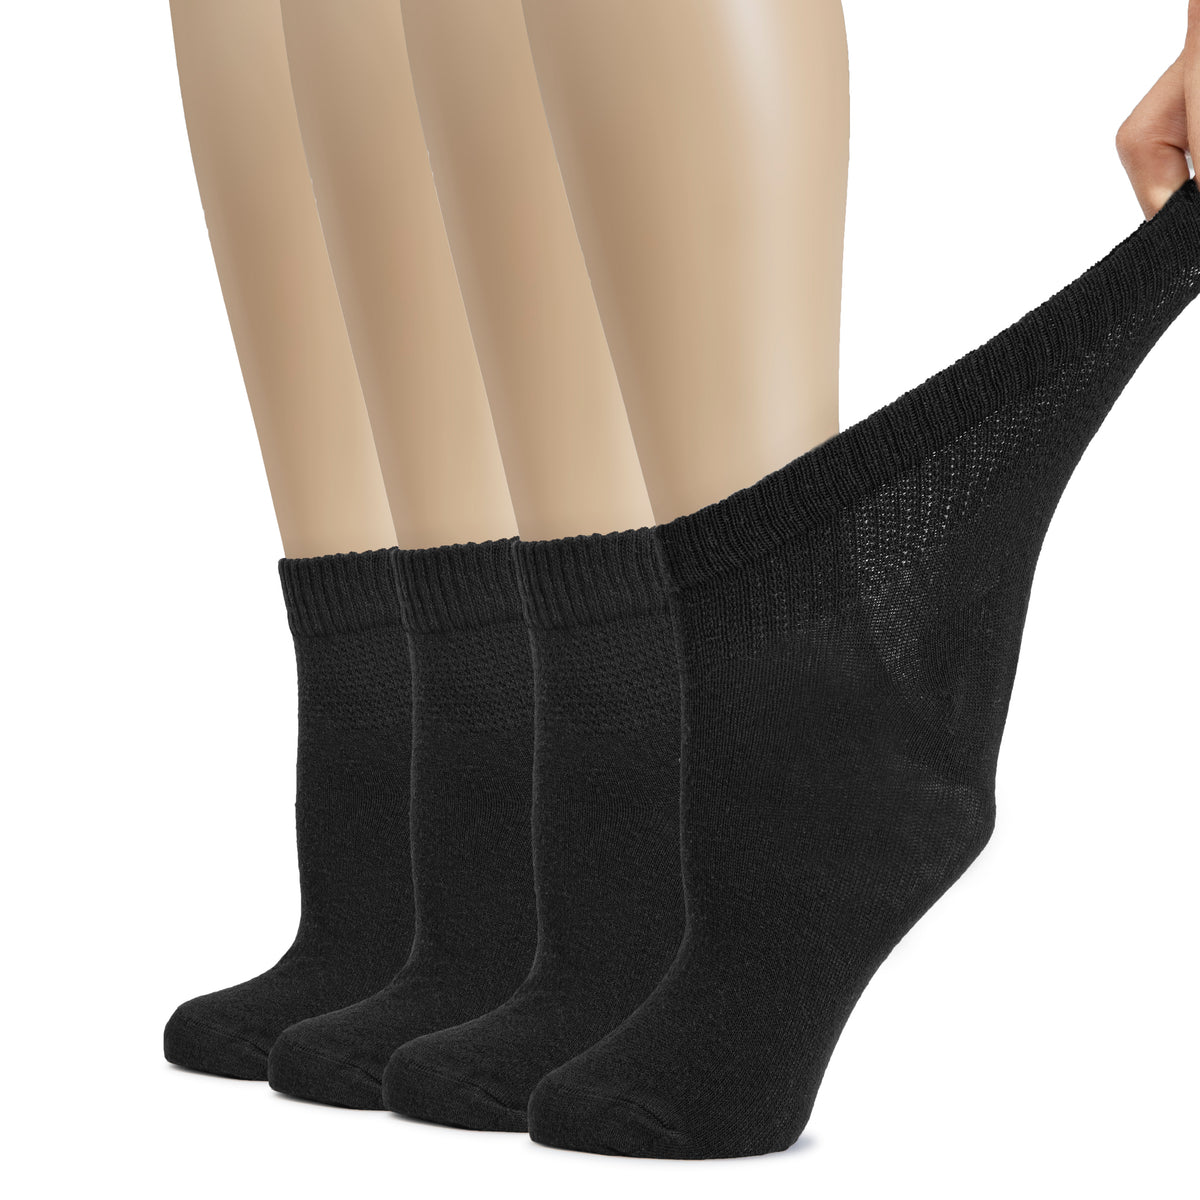 The image depicts a woman's feet adorned with Women's Cotton Diabetic Ankle Socks in black. The socks are arranged in a neat row.